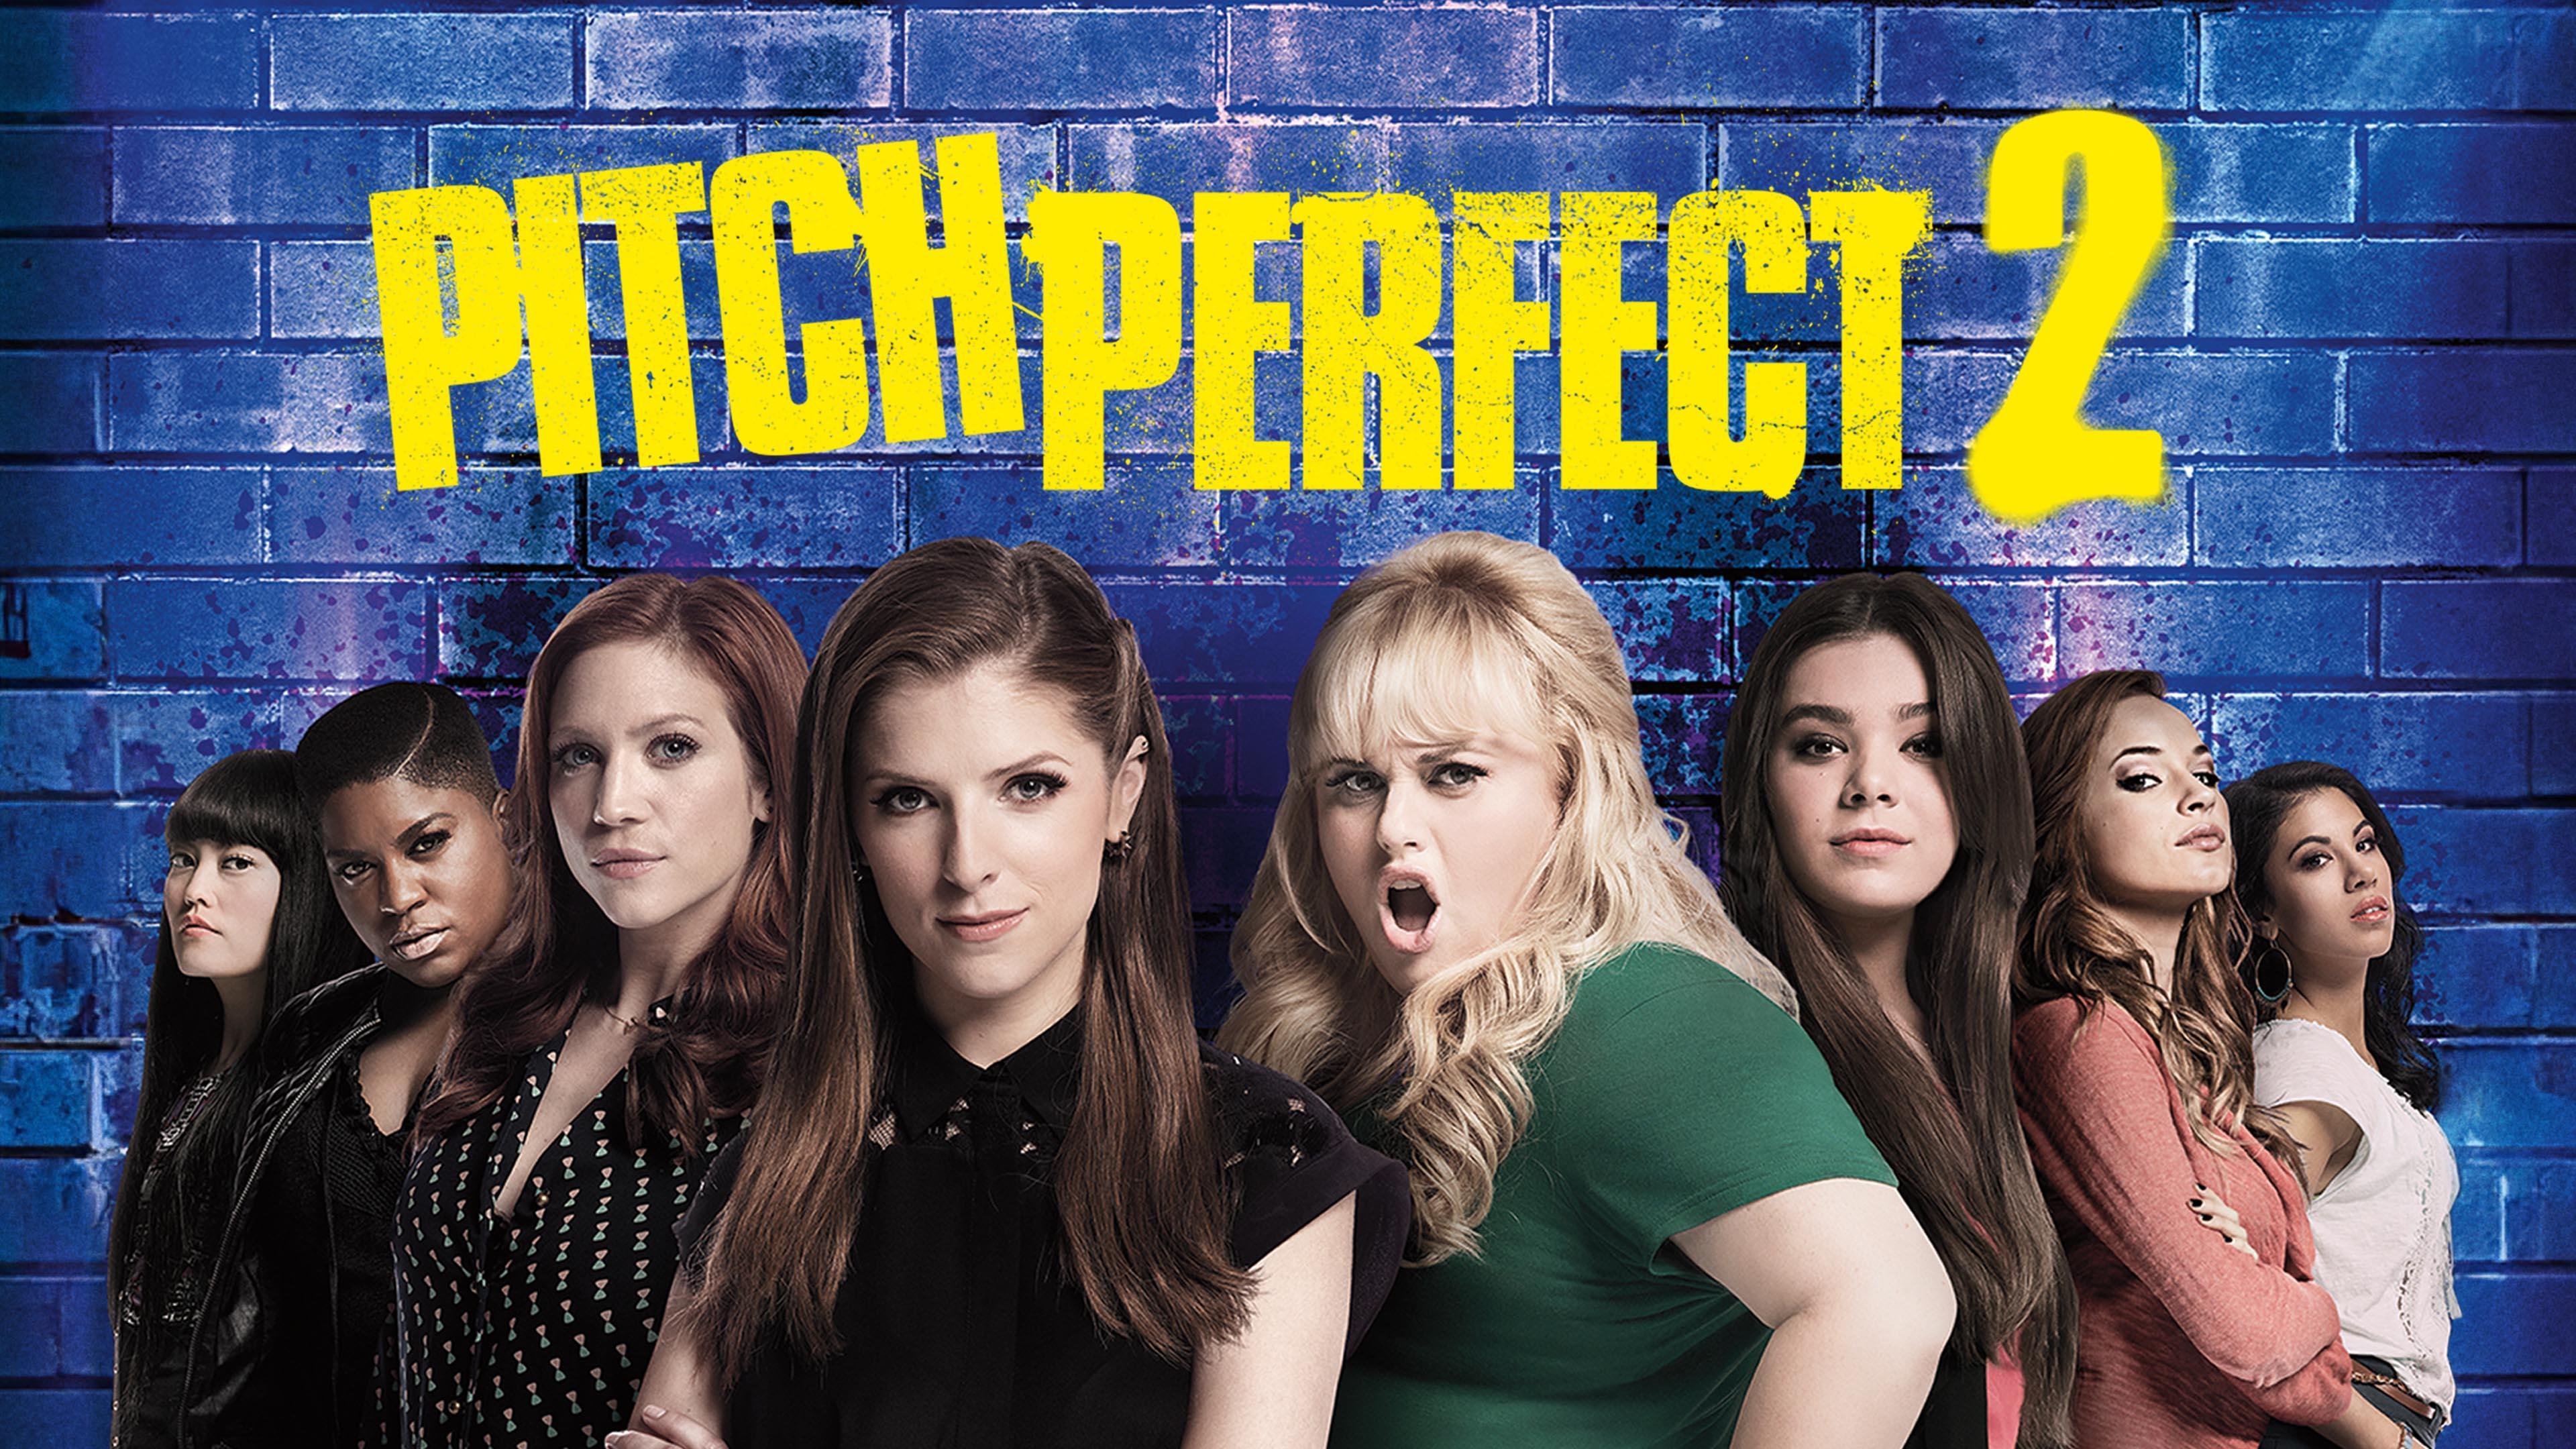 Watch Pitch Perfect 2 (HBO) | Max